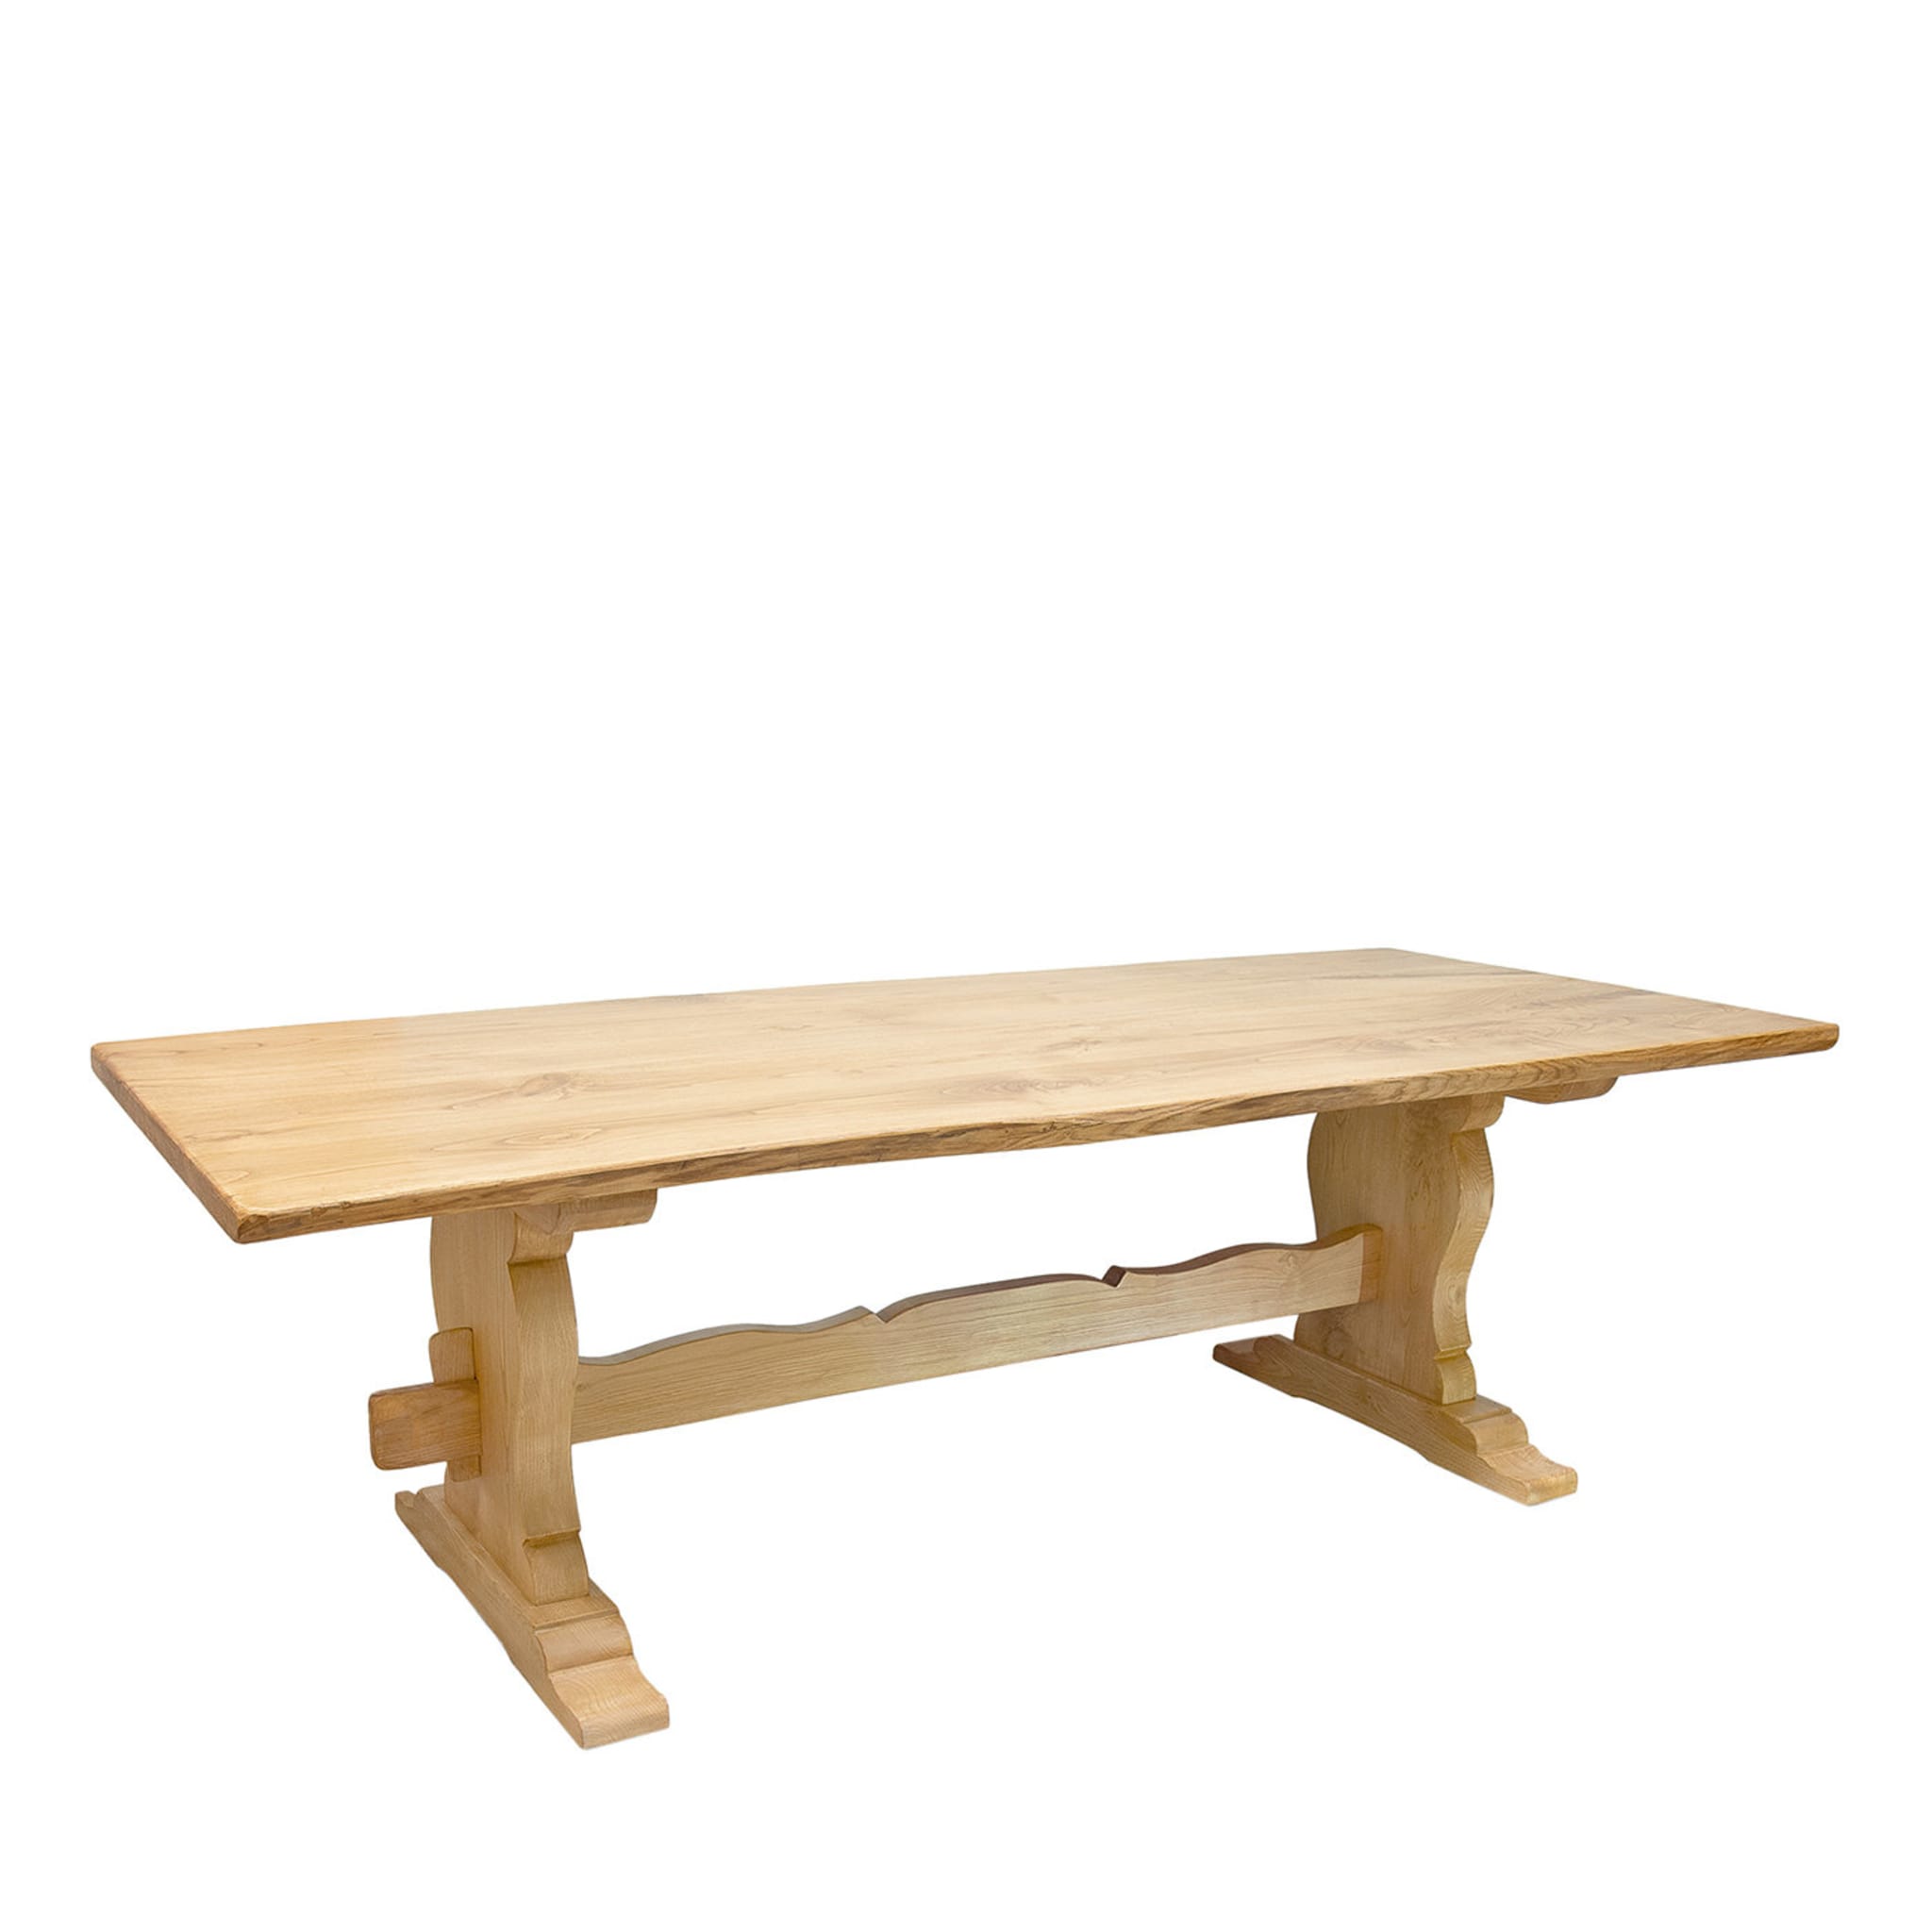 Rustic Rectangular Chestnut Dining Table - Main view